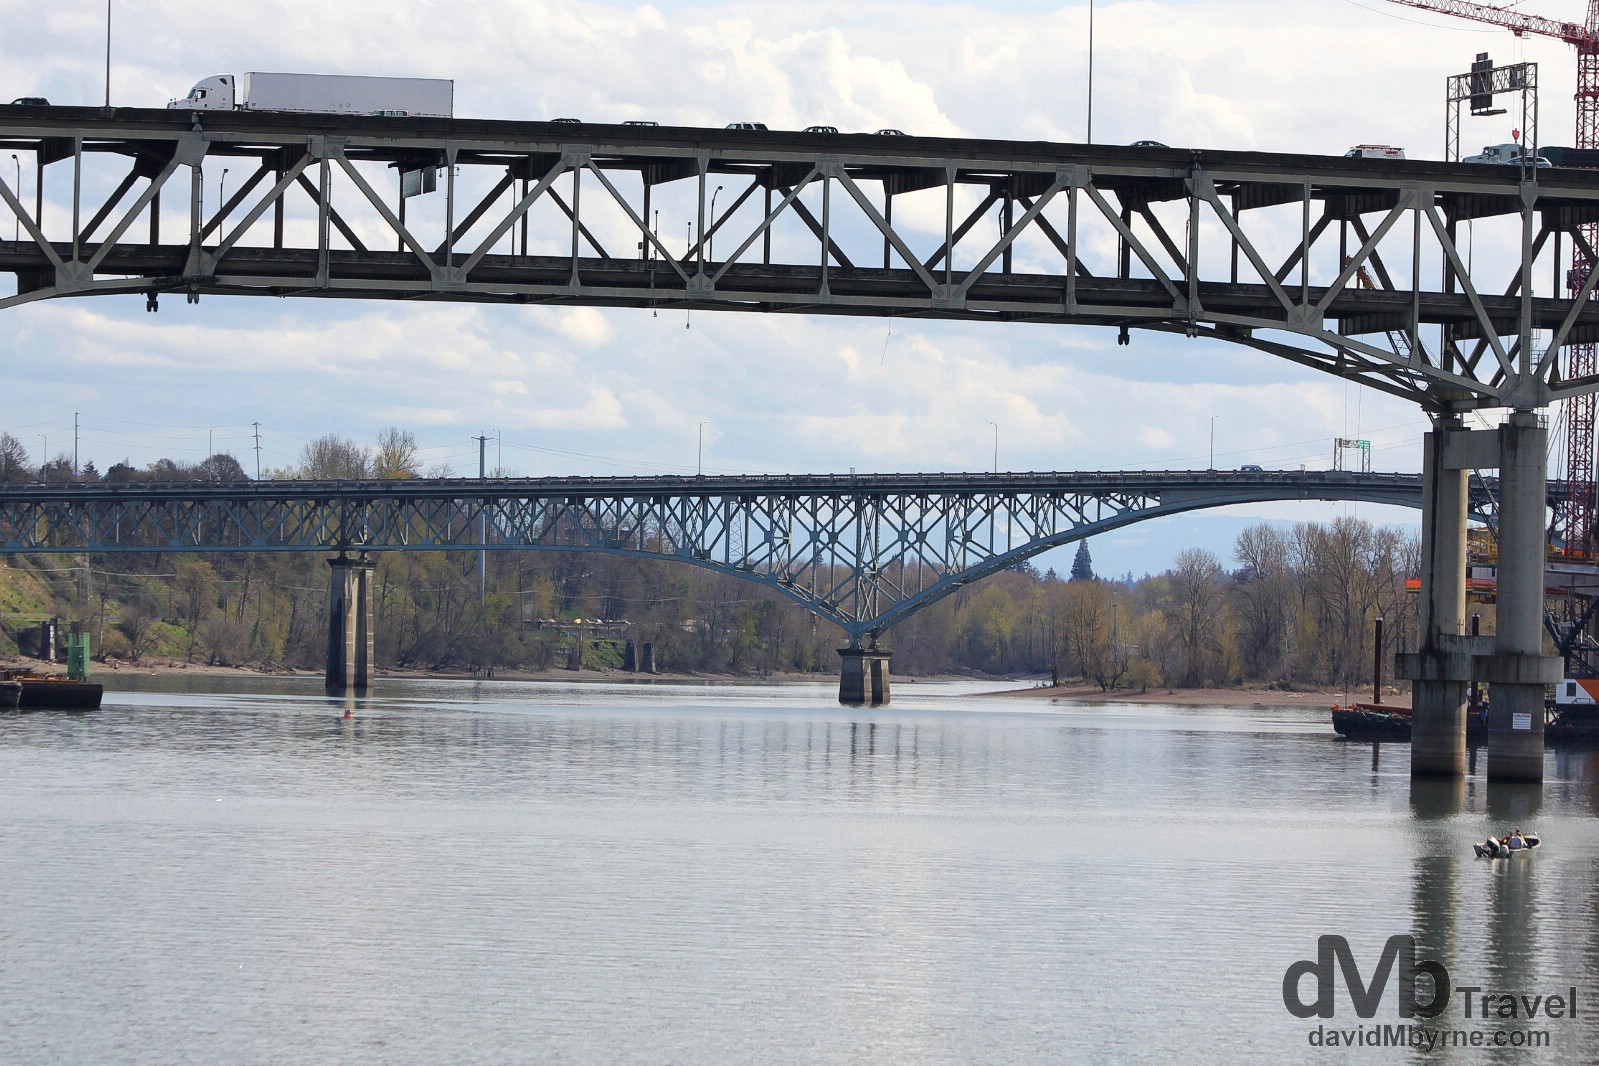 Bridges spanning a section of the Columbia River in Portland, Oregon, USA. March 28, 2013. 